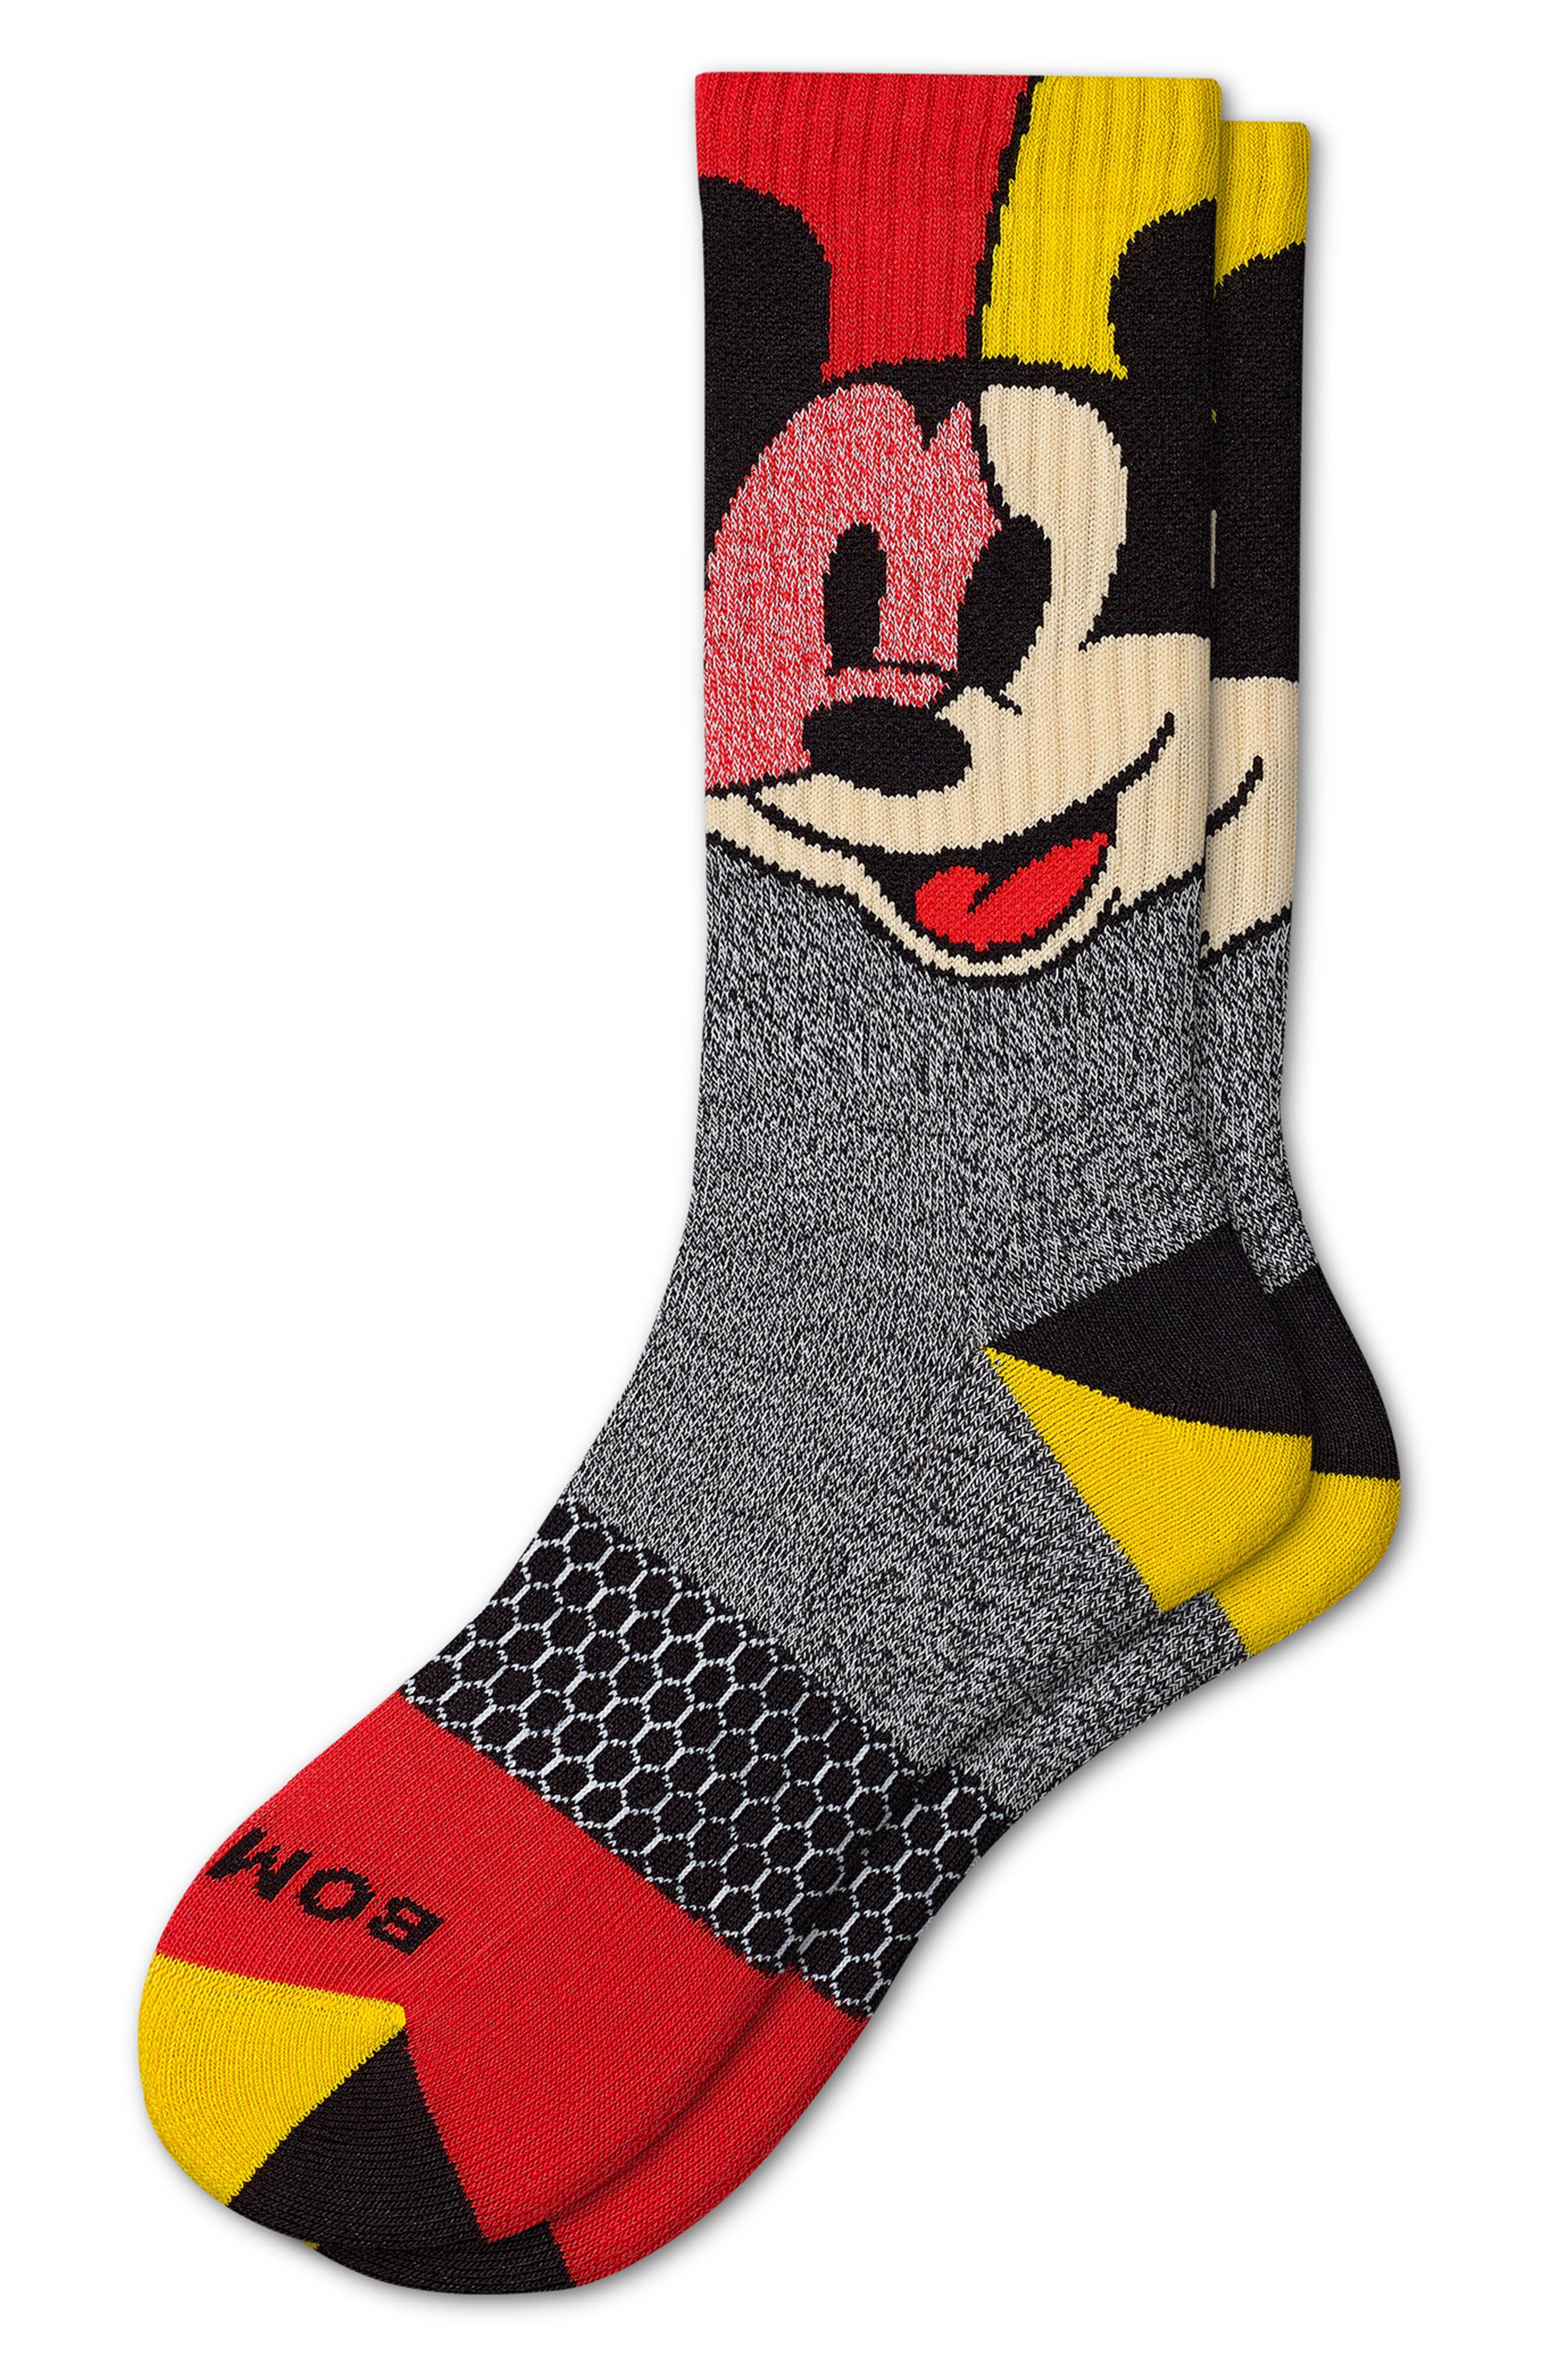 New with Tags Stance Socks Women's "True Original" Mickey Mouse Disney S or M